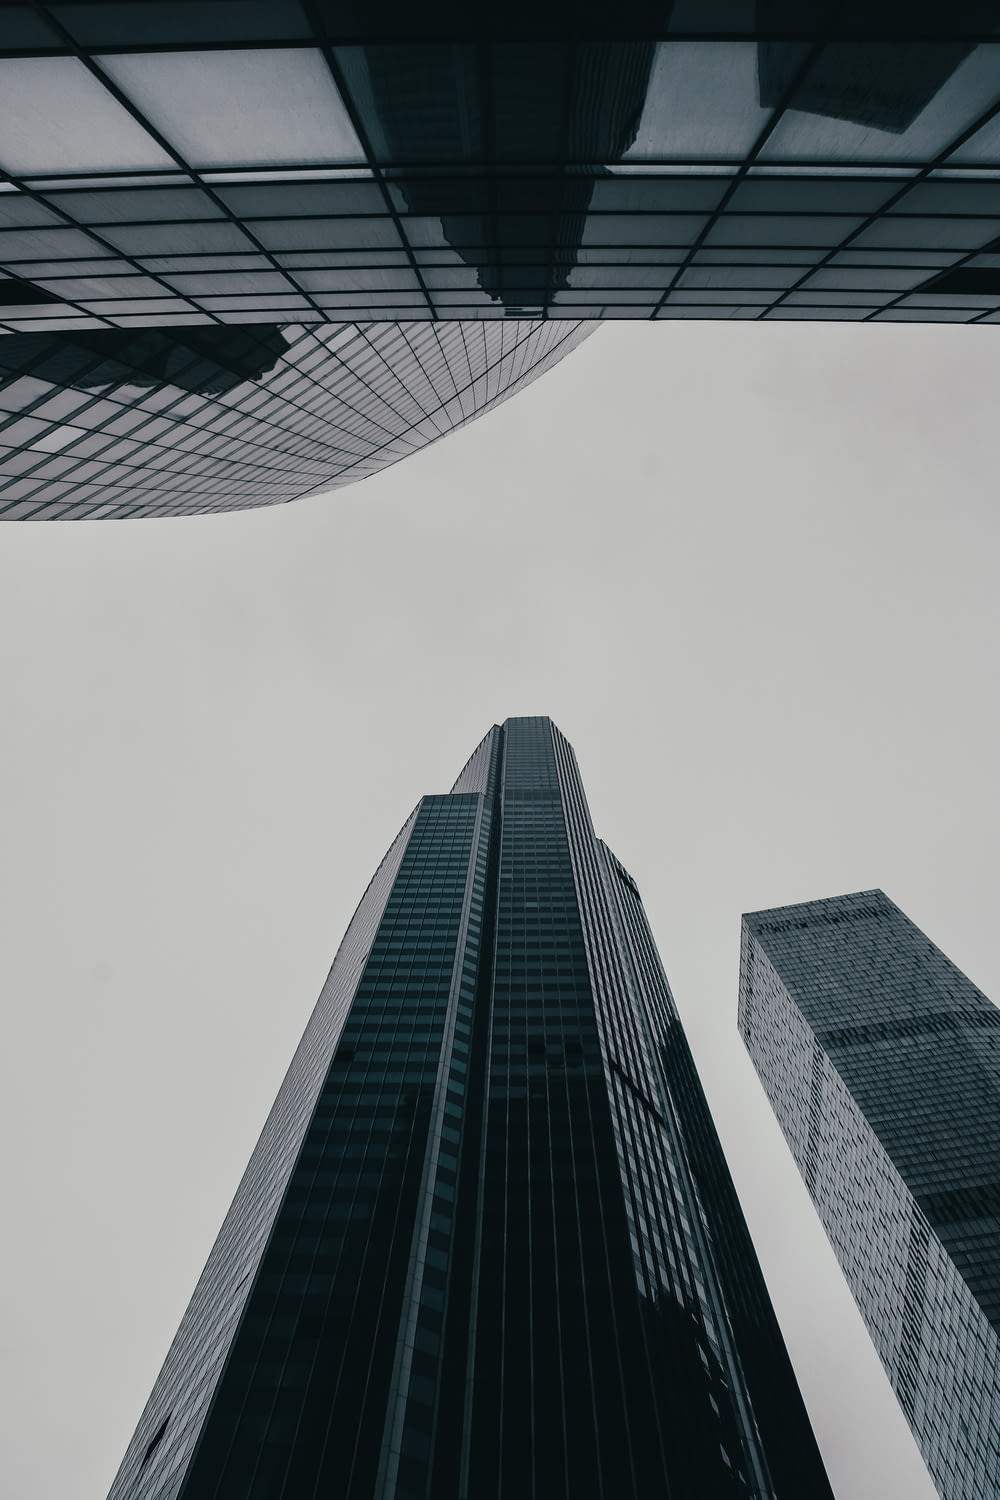 looking up at two tall skyscrapers in a city